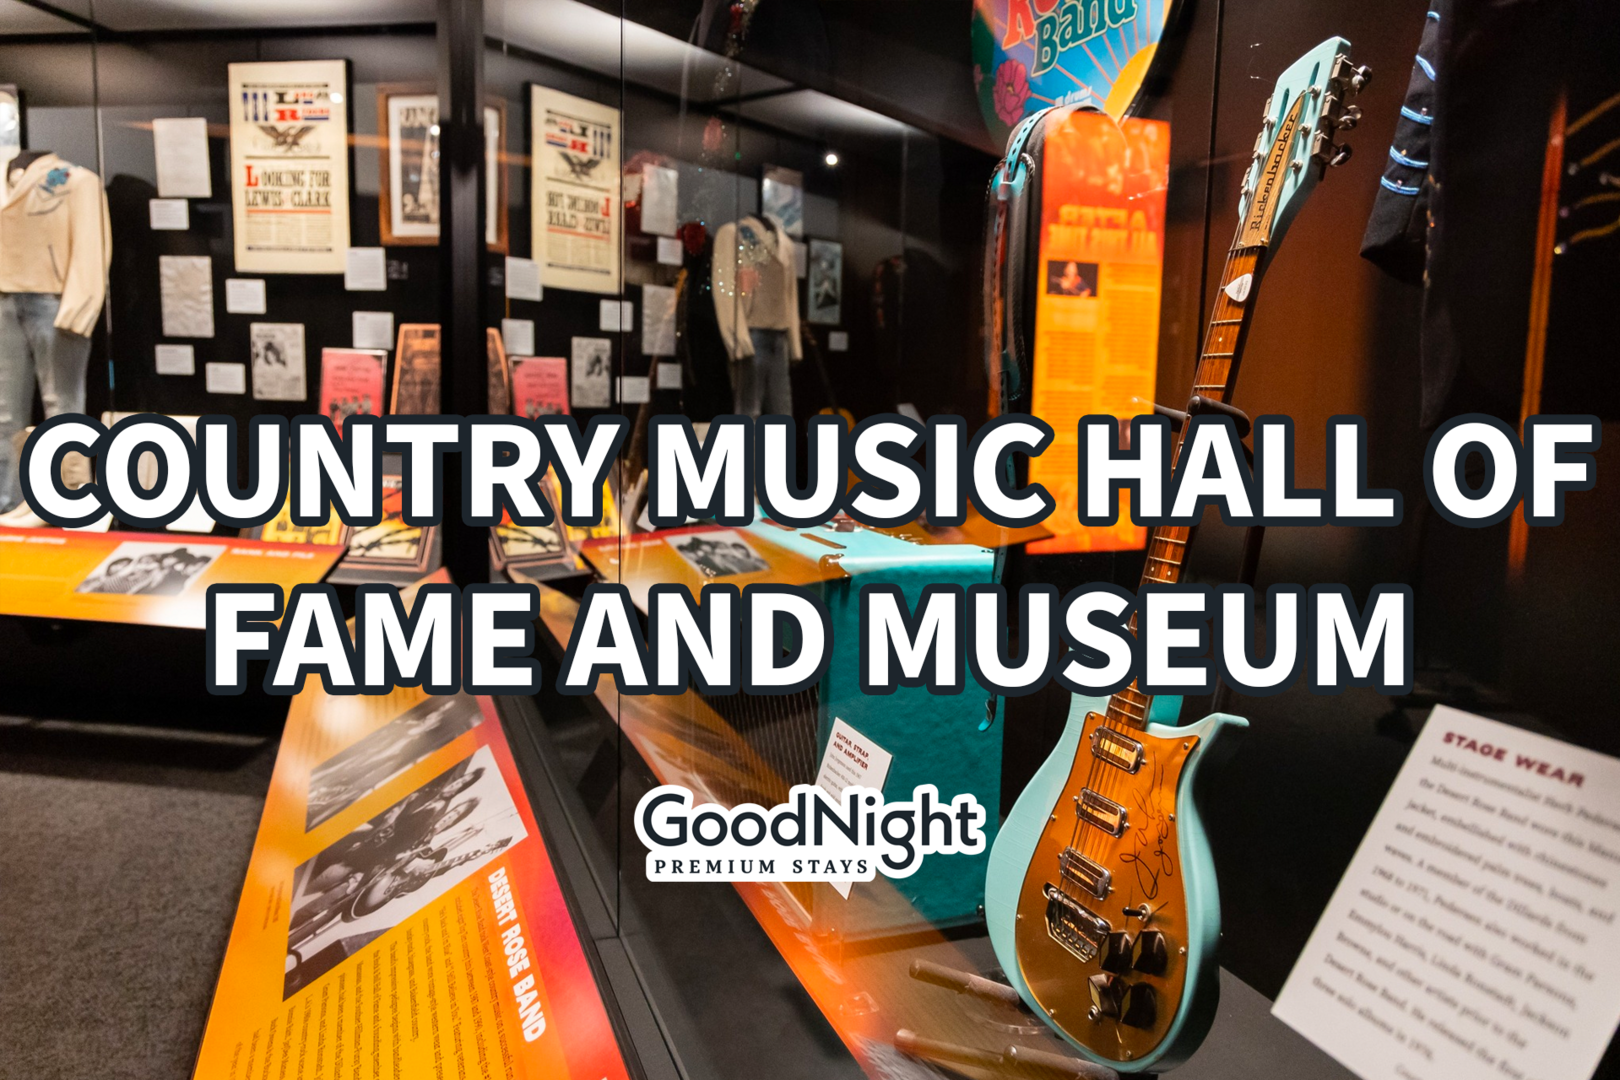 5 mins: Country Music Hall of Fame and Museum